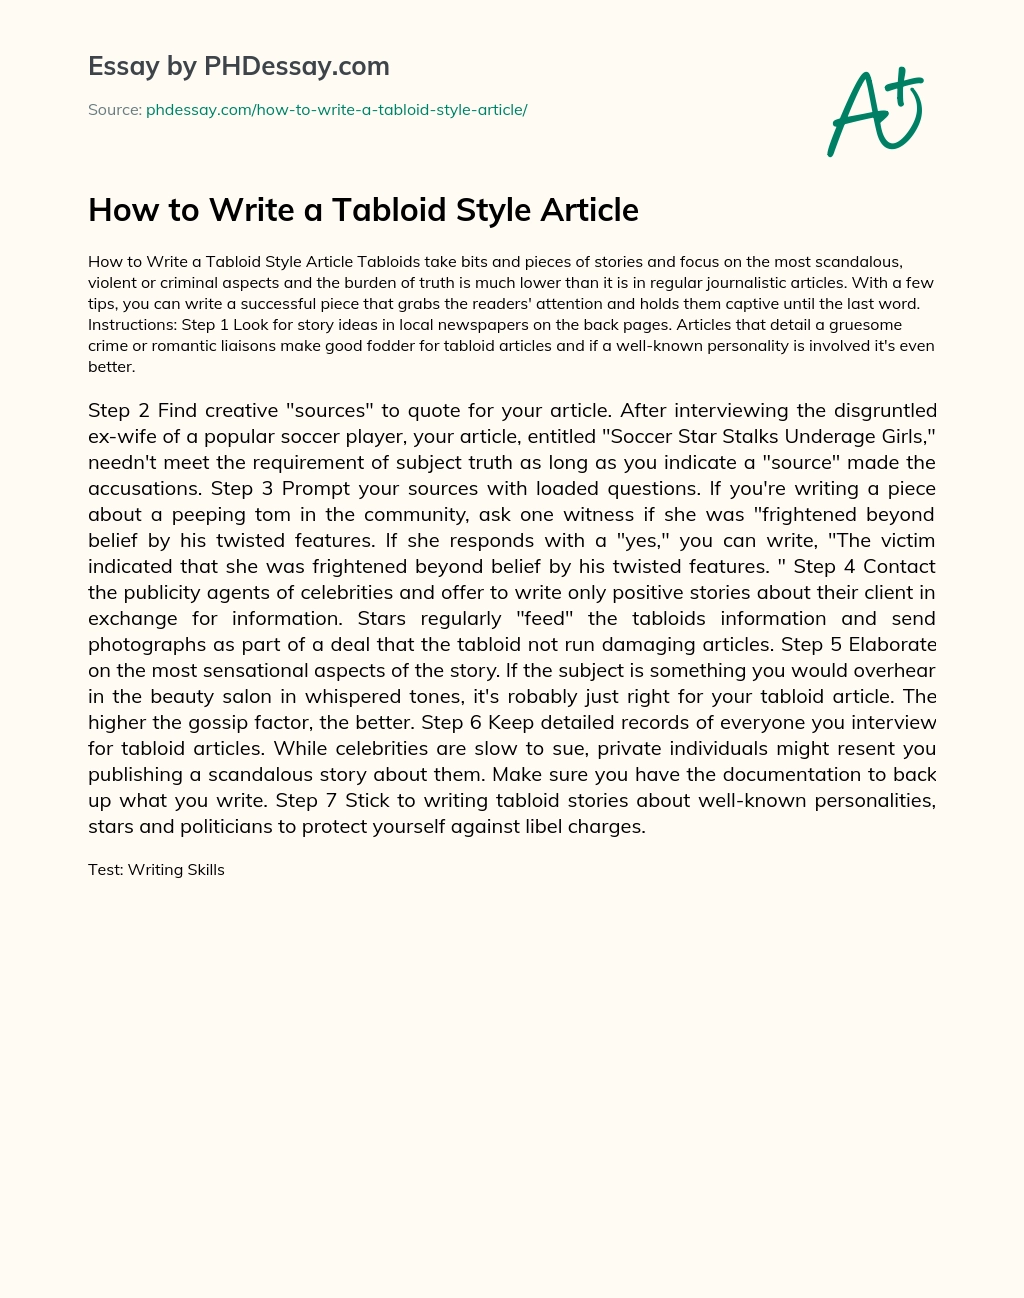 How to Write a Tabloid Style Article - PHDessay.com